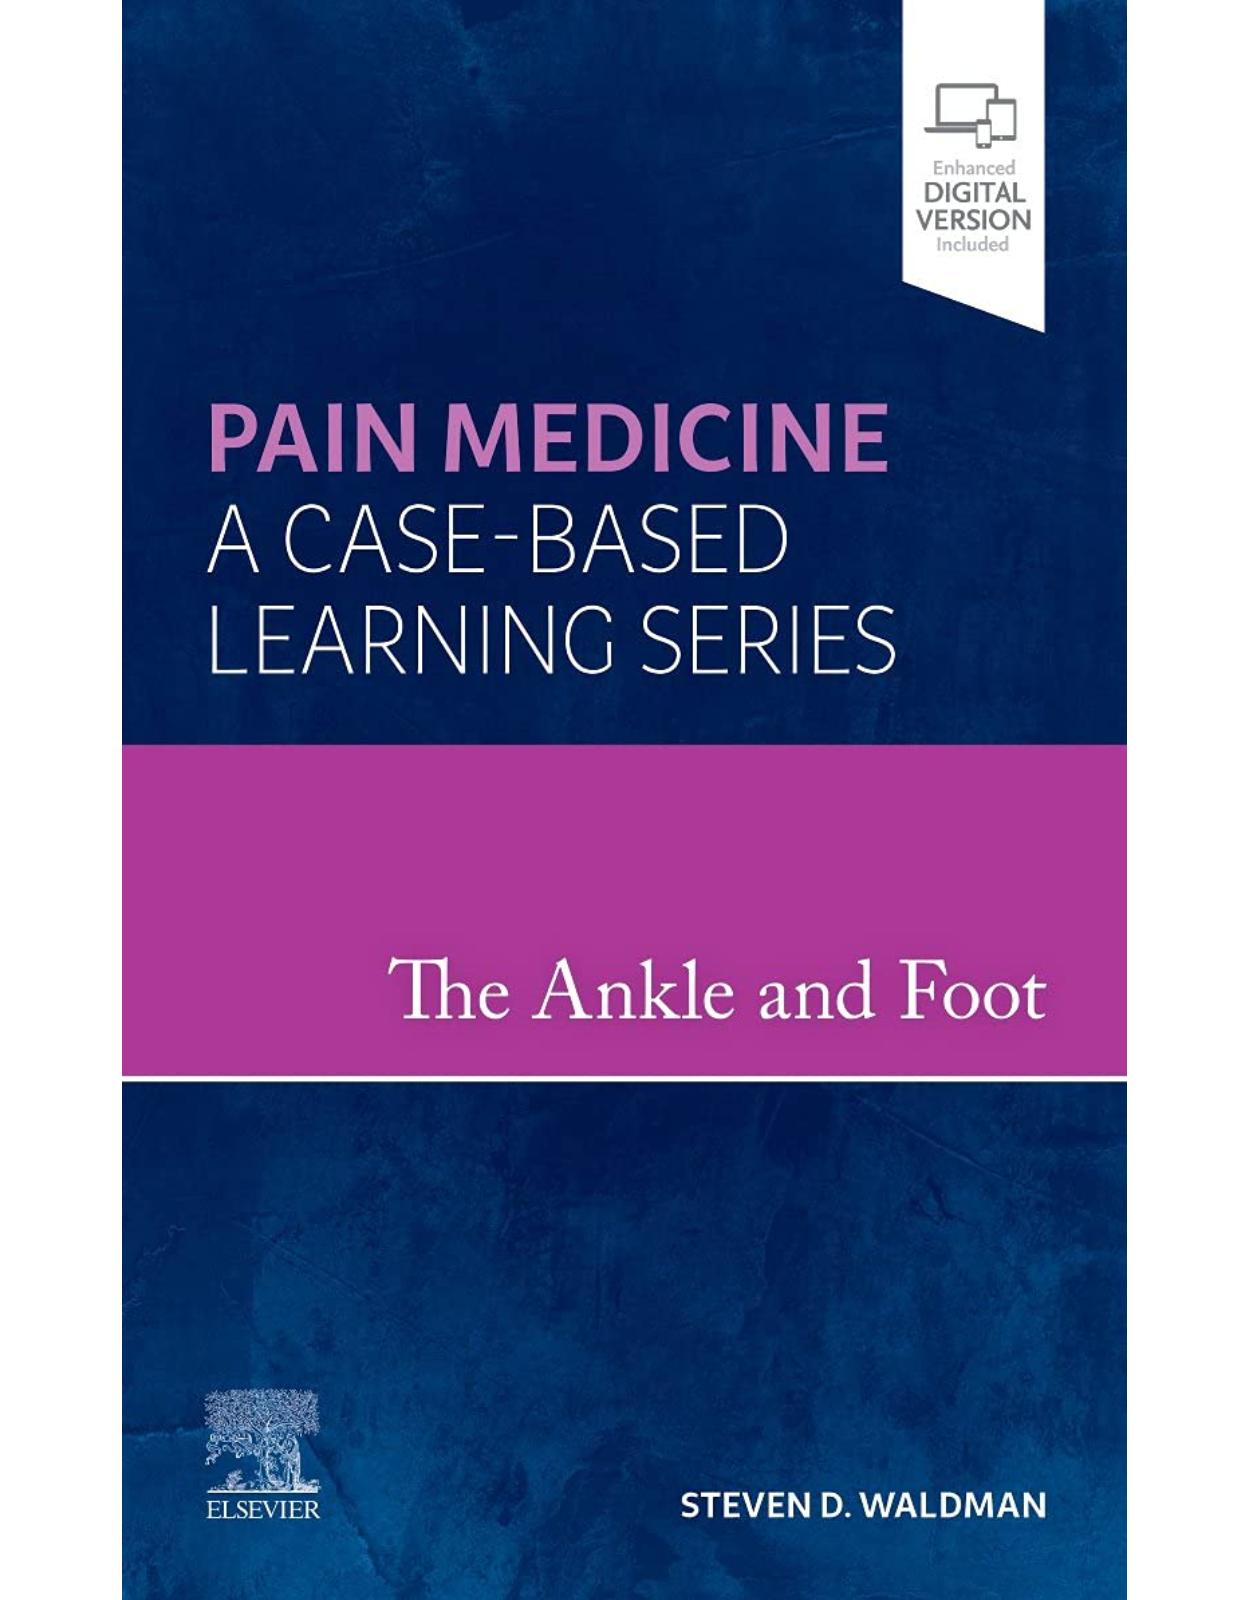 The Ankle and Foot: Pain Medicine: A Case-Based Learning Series